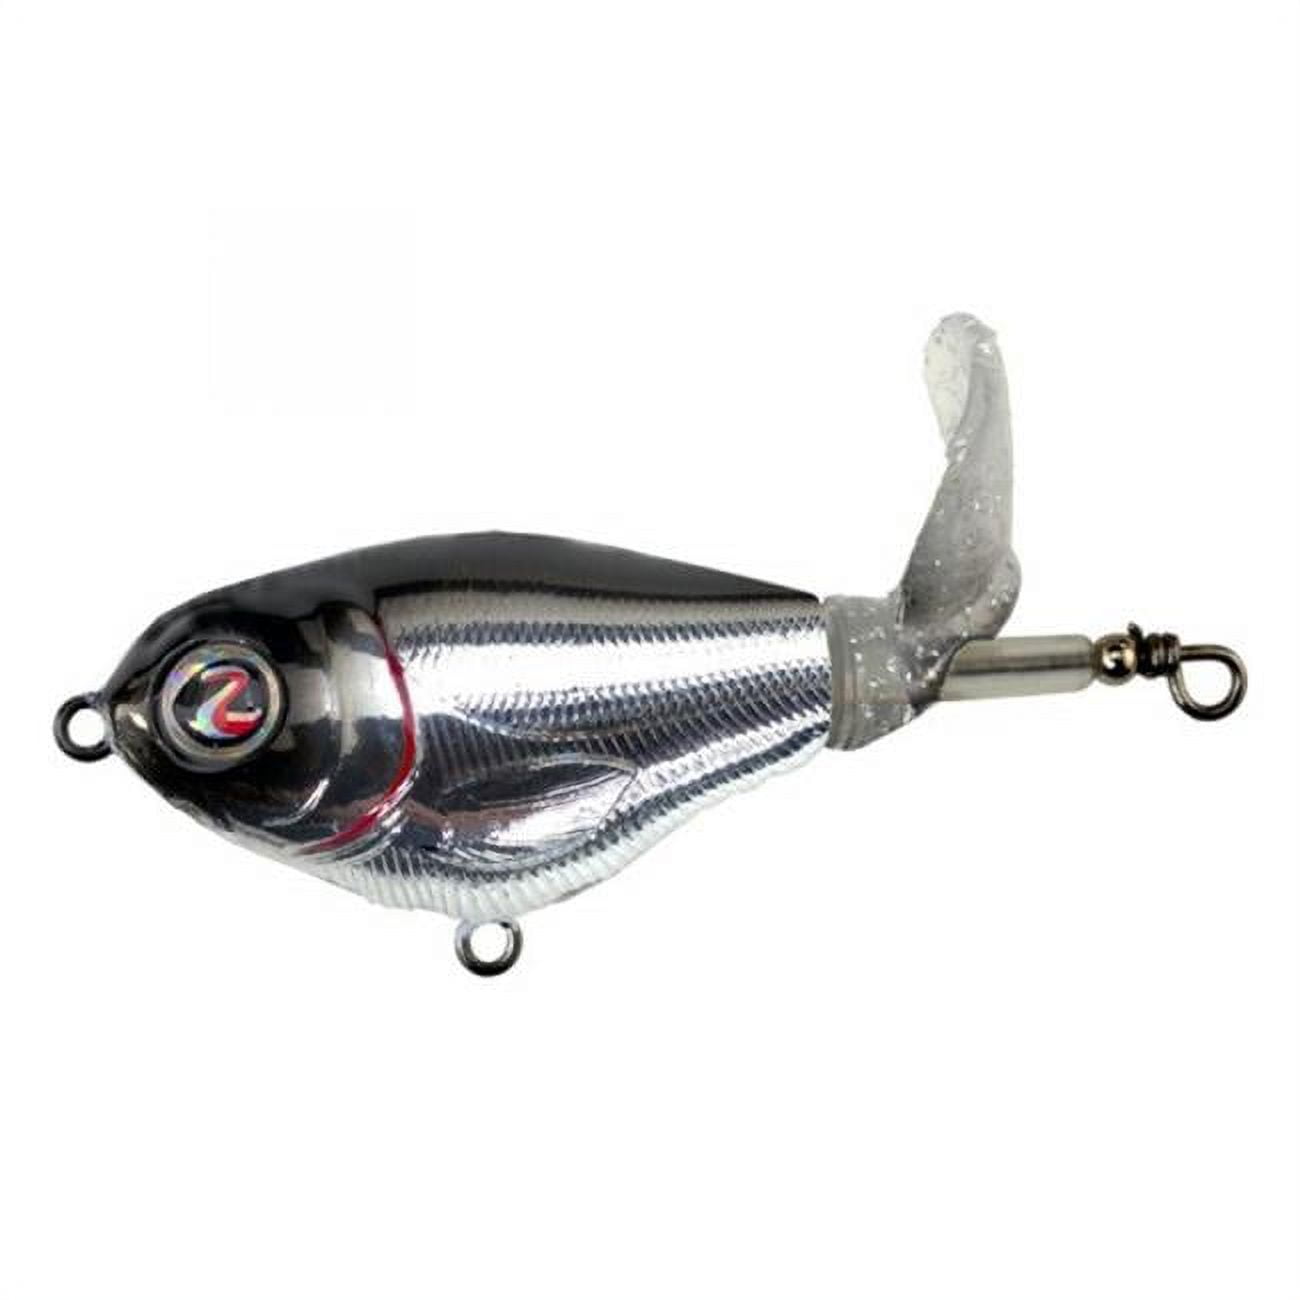 River2Sea Whopper Plopper Review - Wired2Fish